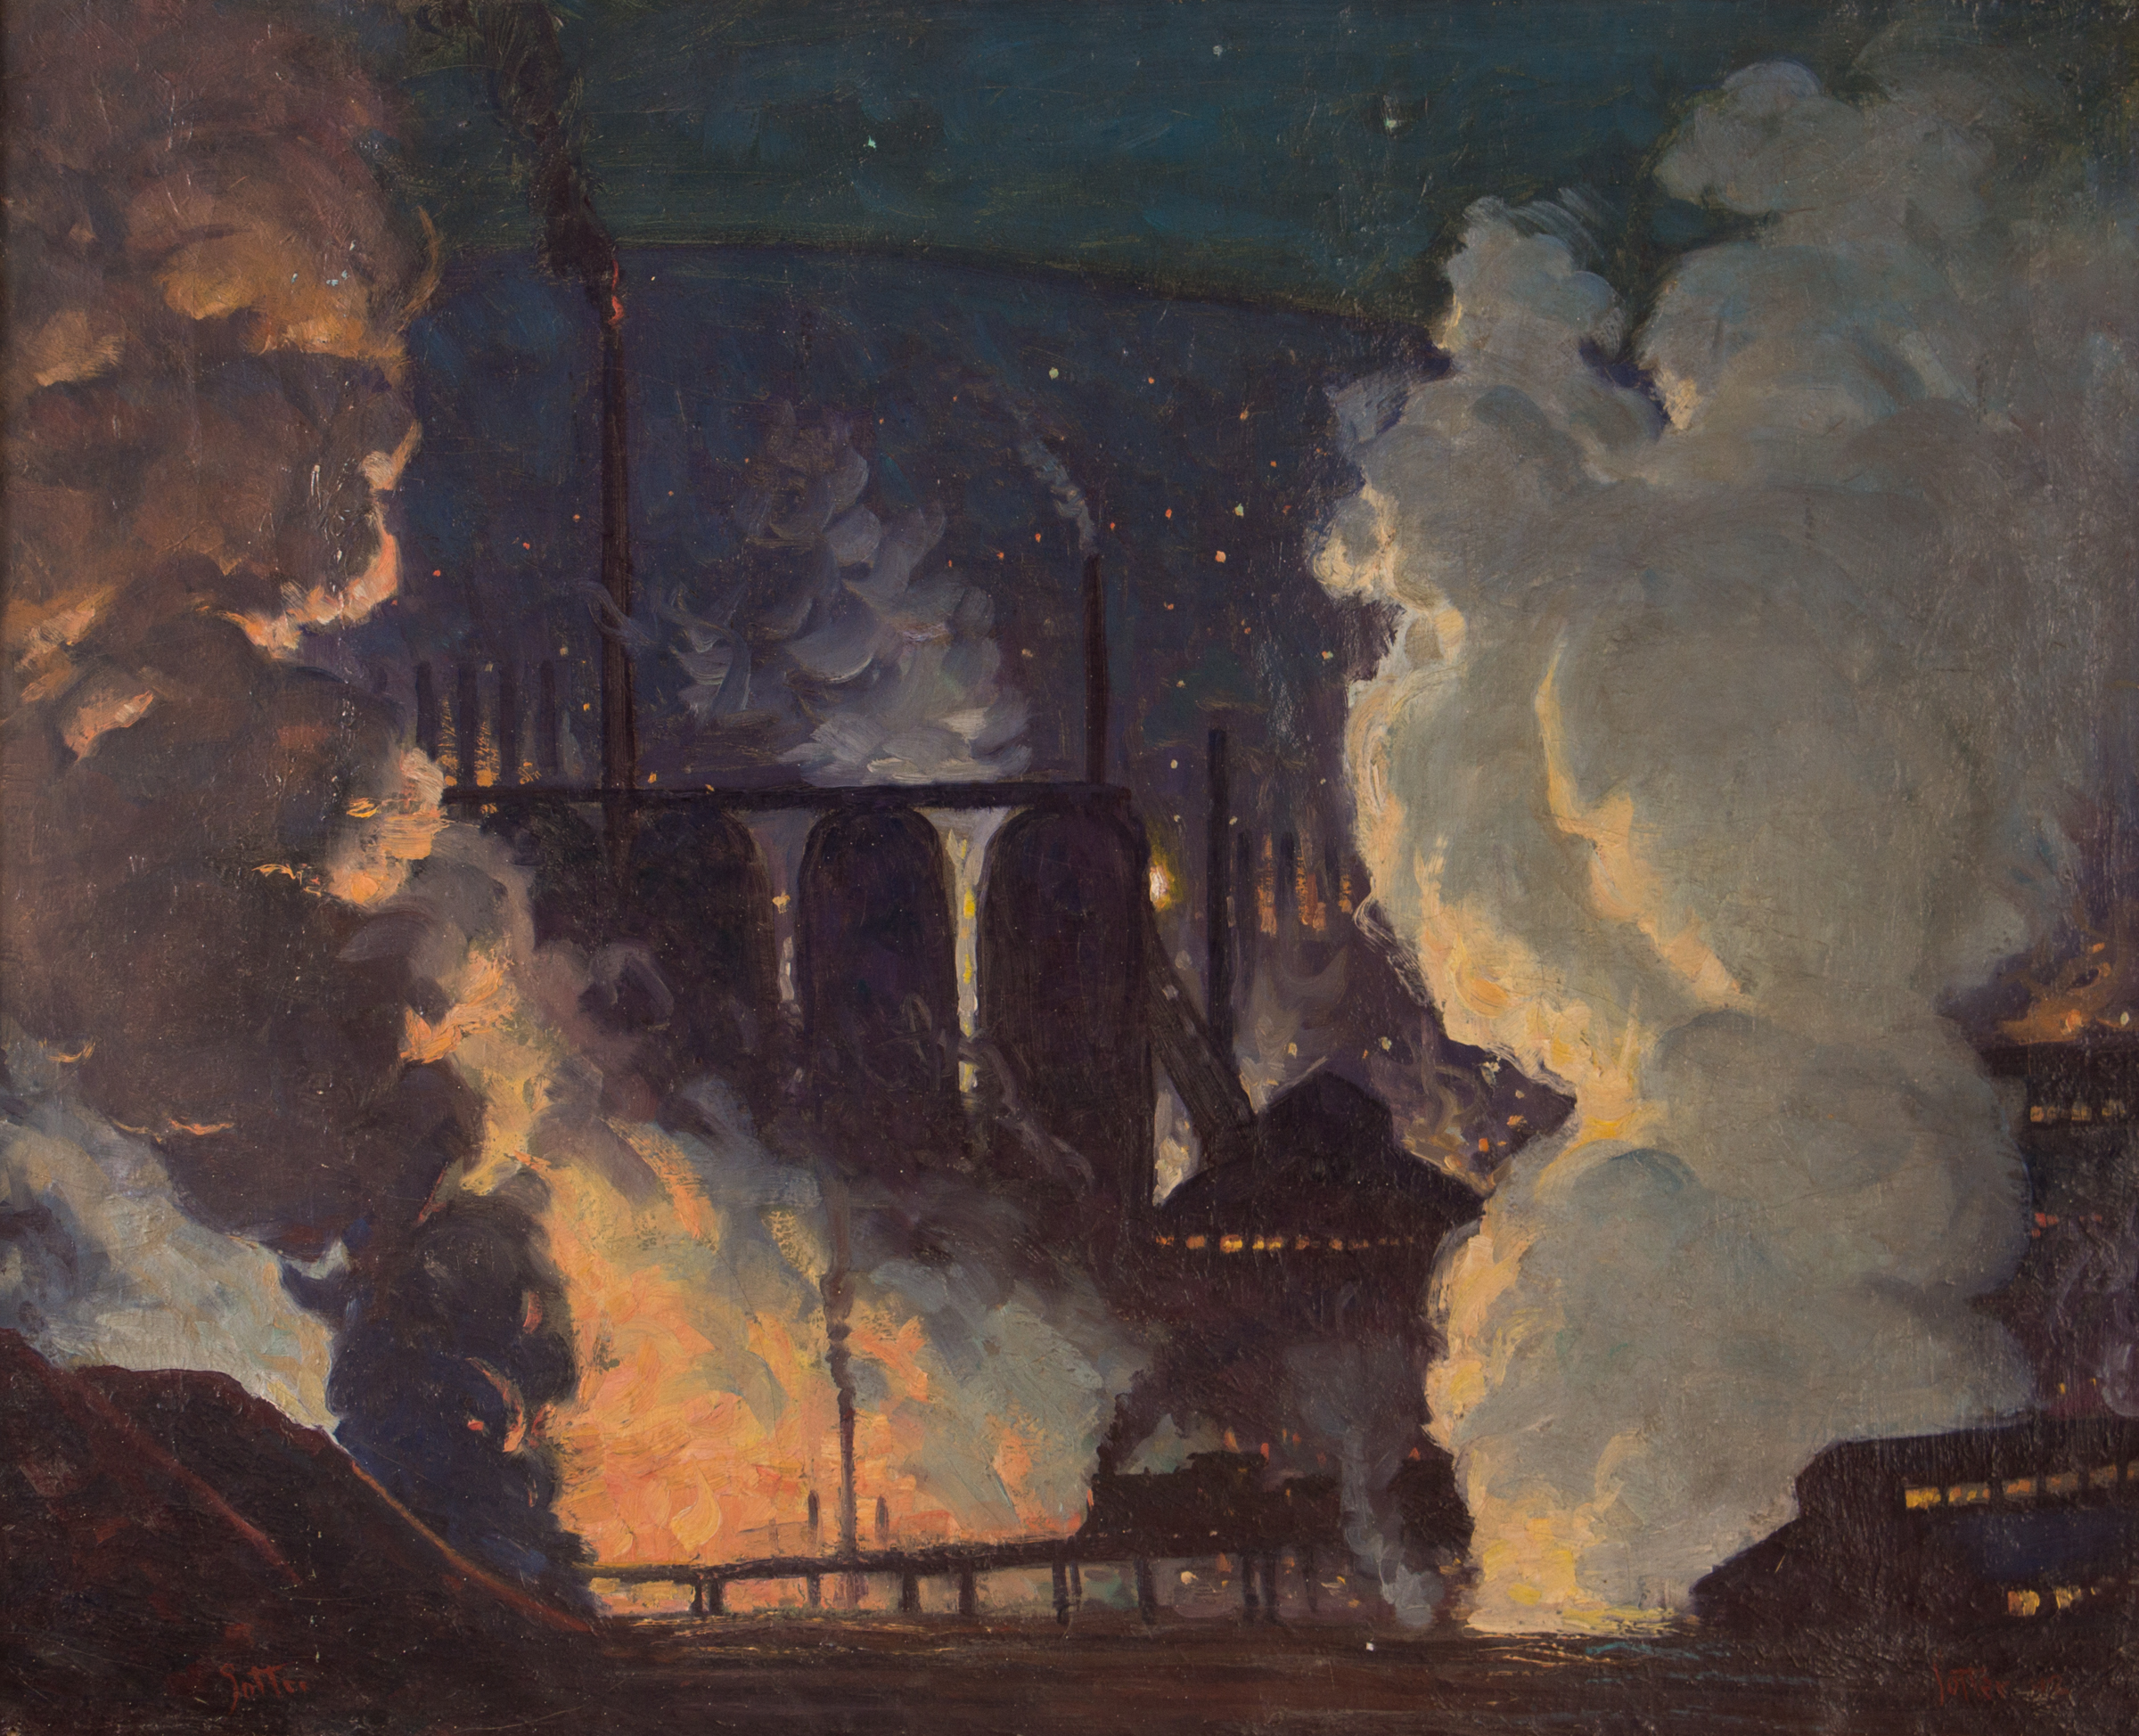 Artist: George William Sotter (American 1879-1953) | Title: Fiery Blast Furnaces at Night, Pittsburgh |Date: 1942 |Photography Credit: Kaela Speicher, Concept Art Gallery.